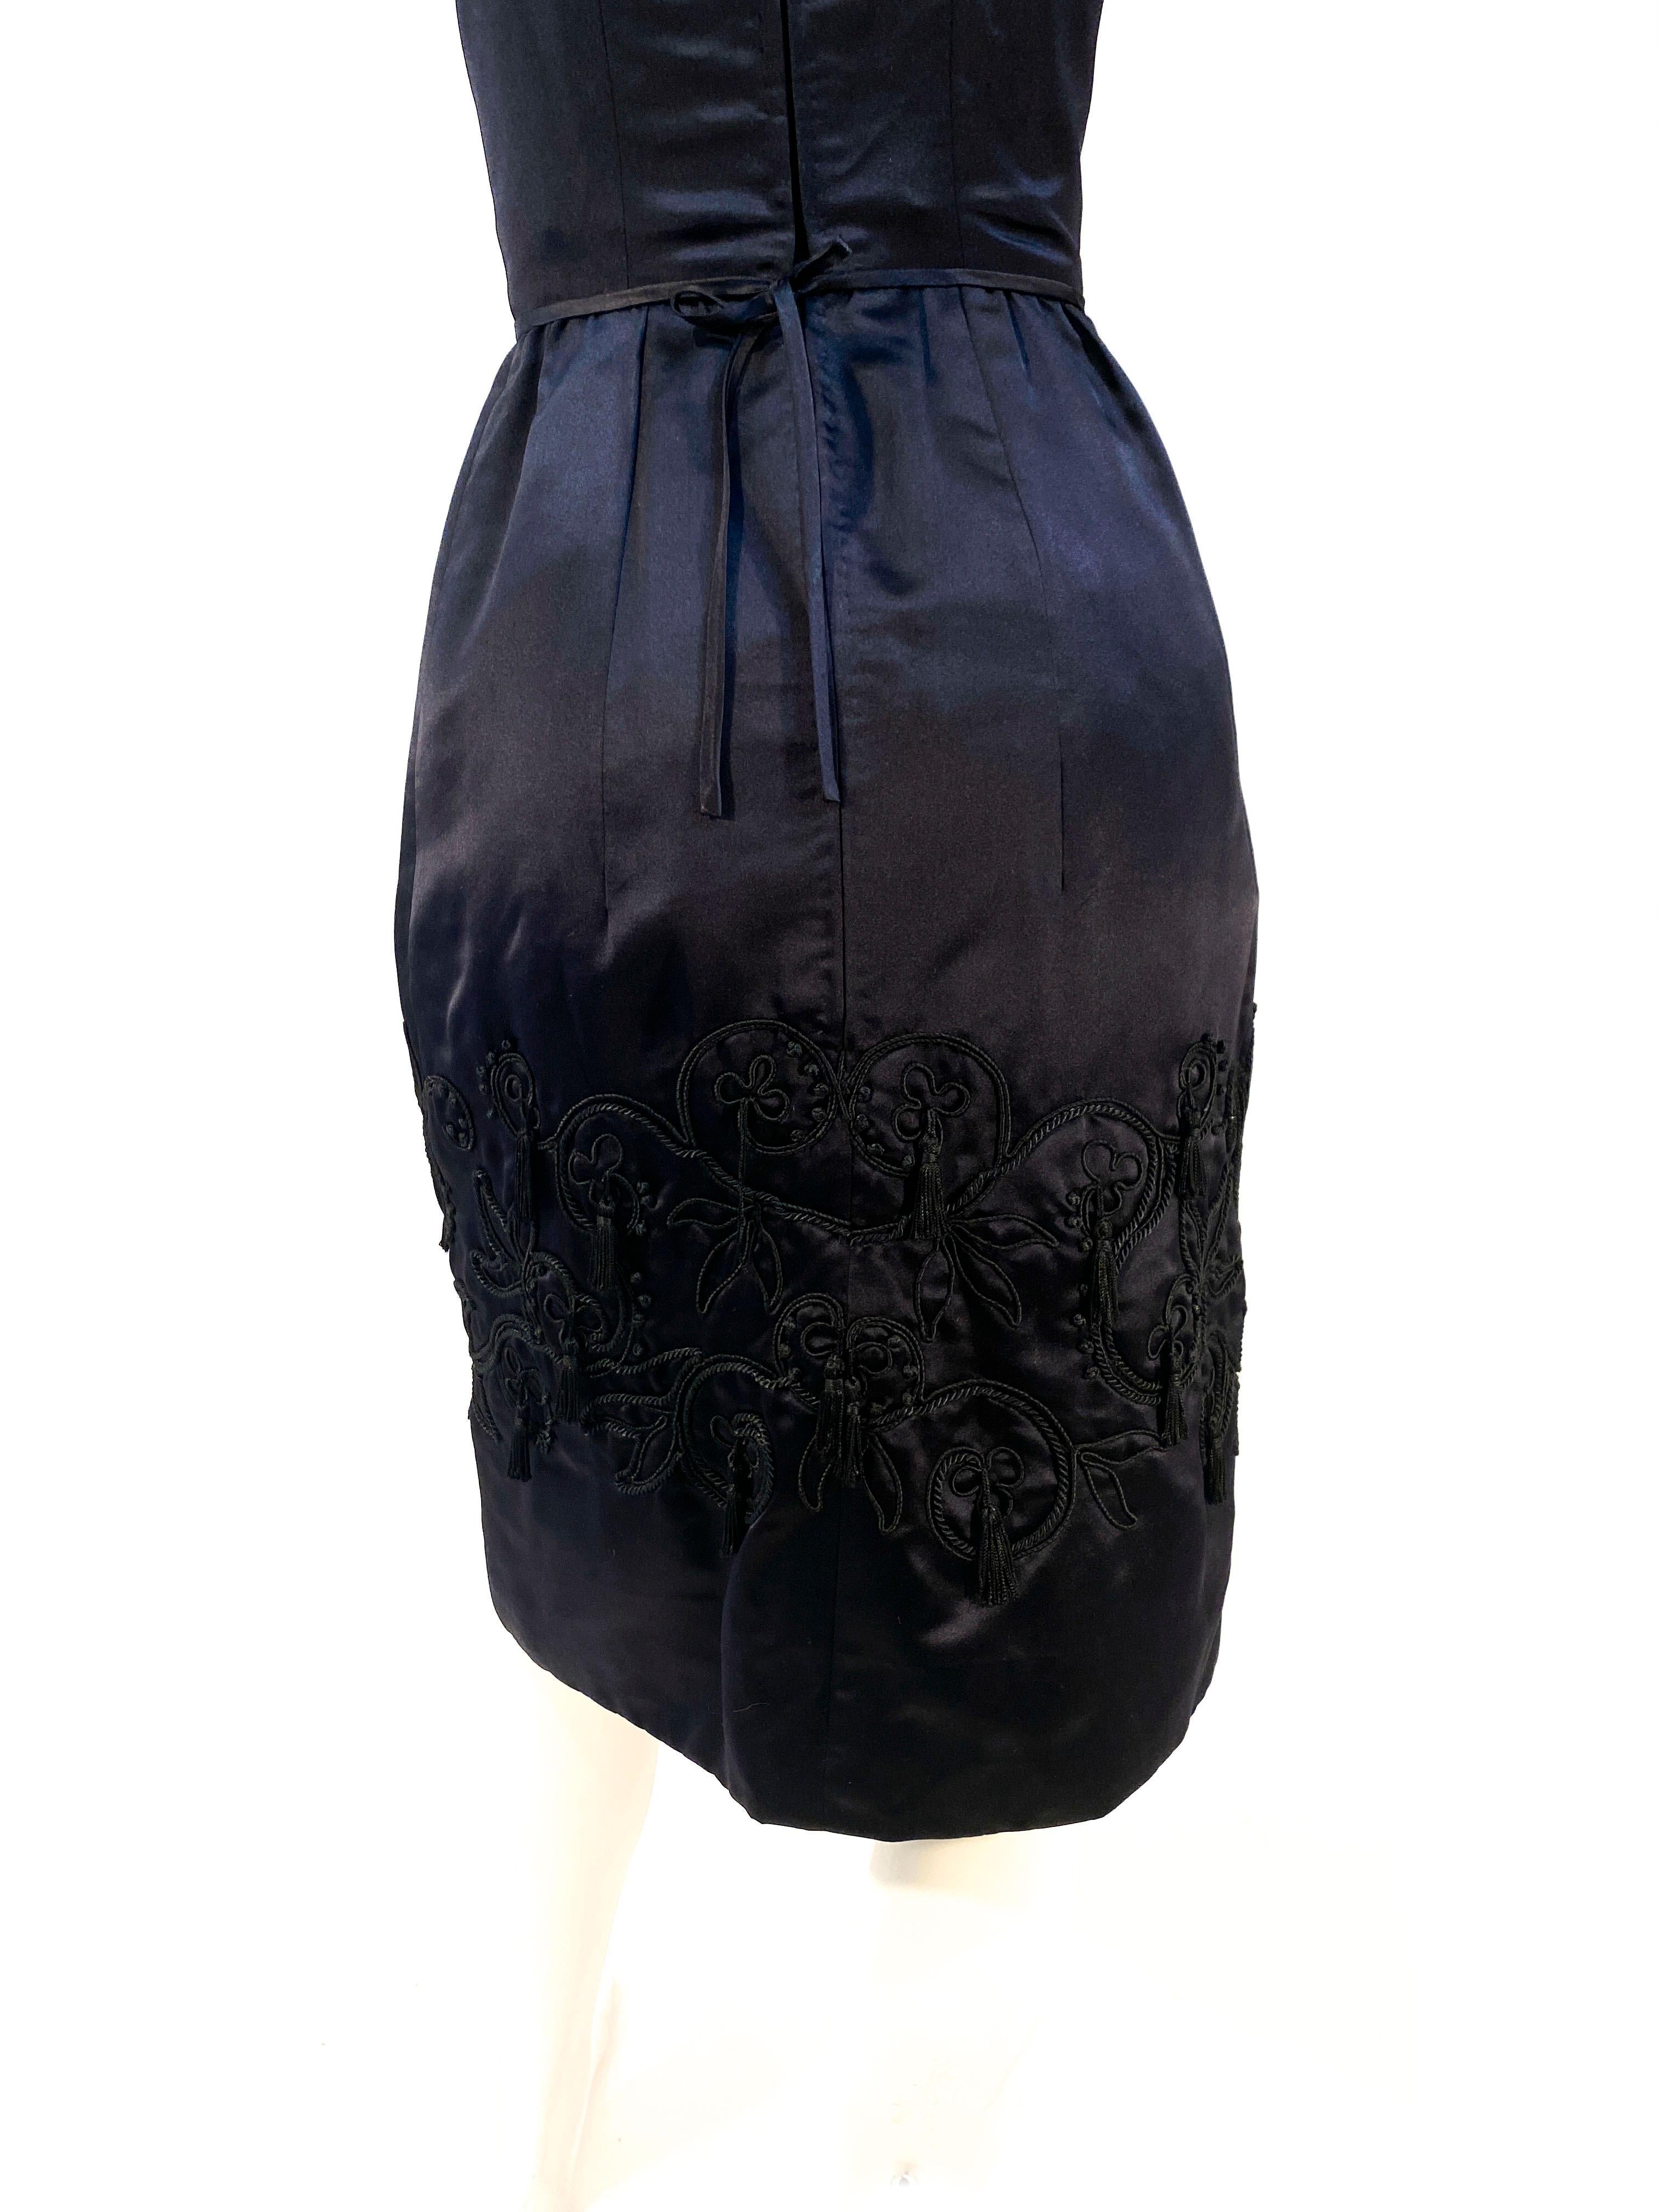 1960s Black Silk Satin Cocktail Dress with Embroidered Skirt For Sale 1